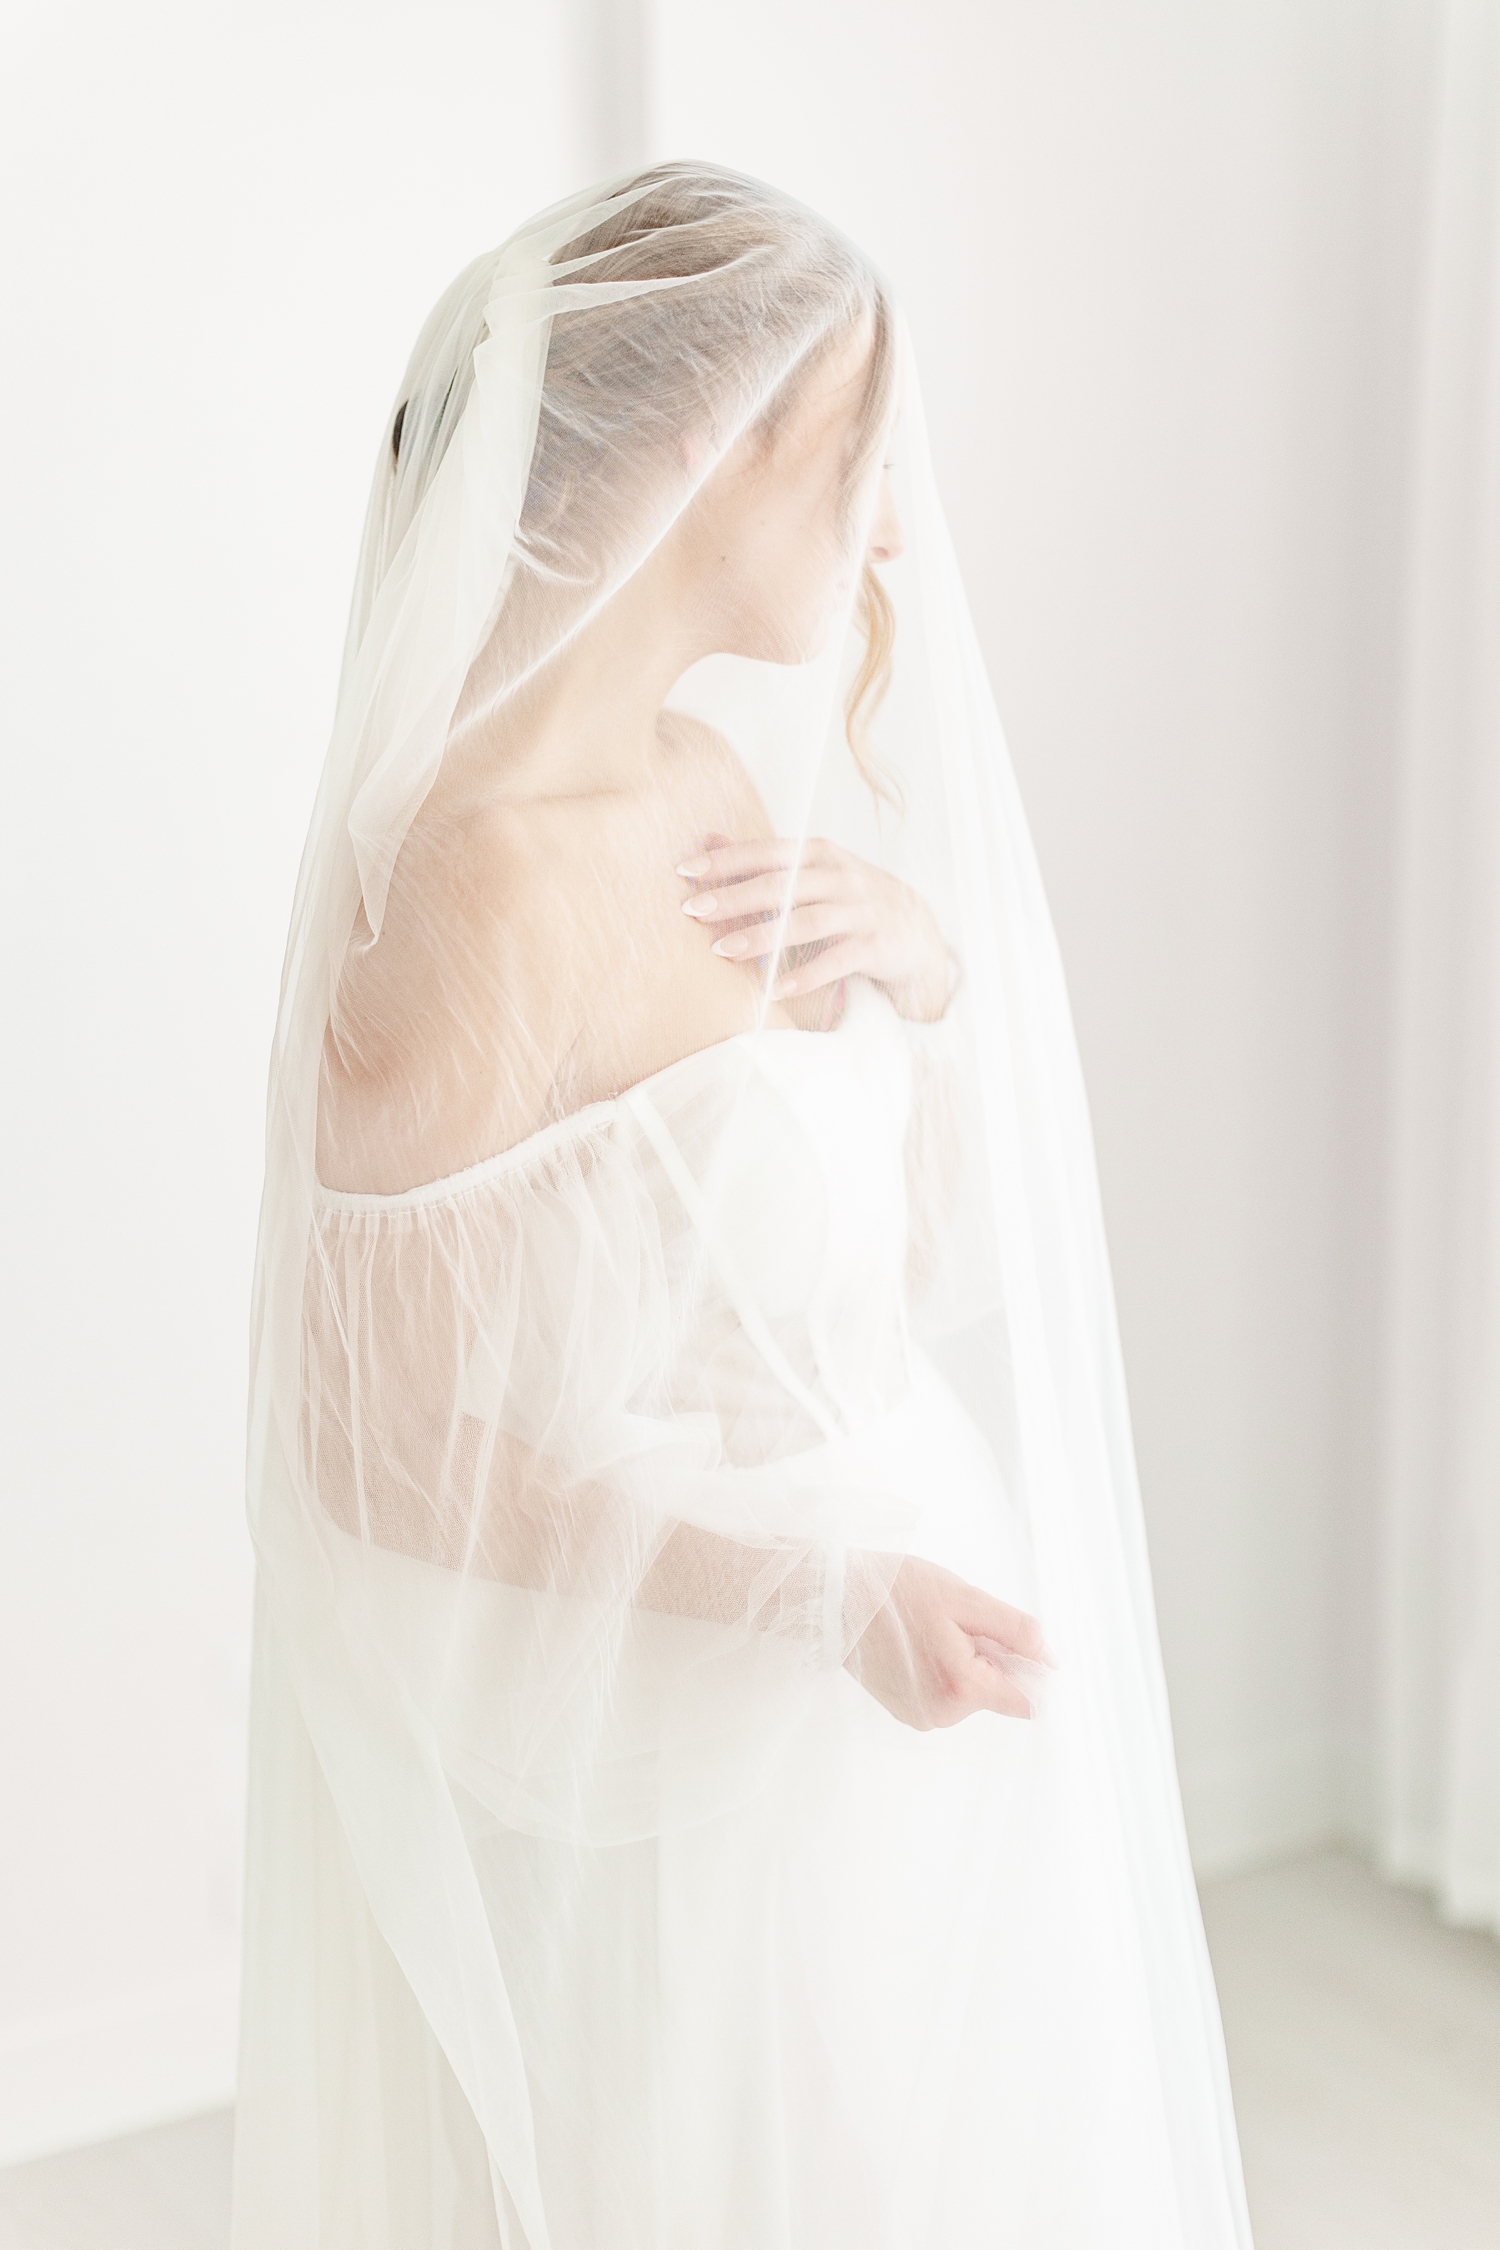 Bride, Ryley, draped in her cathedral length veil, holds part of her veil in one hand while the other graces her chest as she looks away | CB Studio